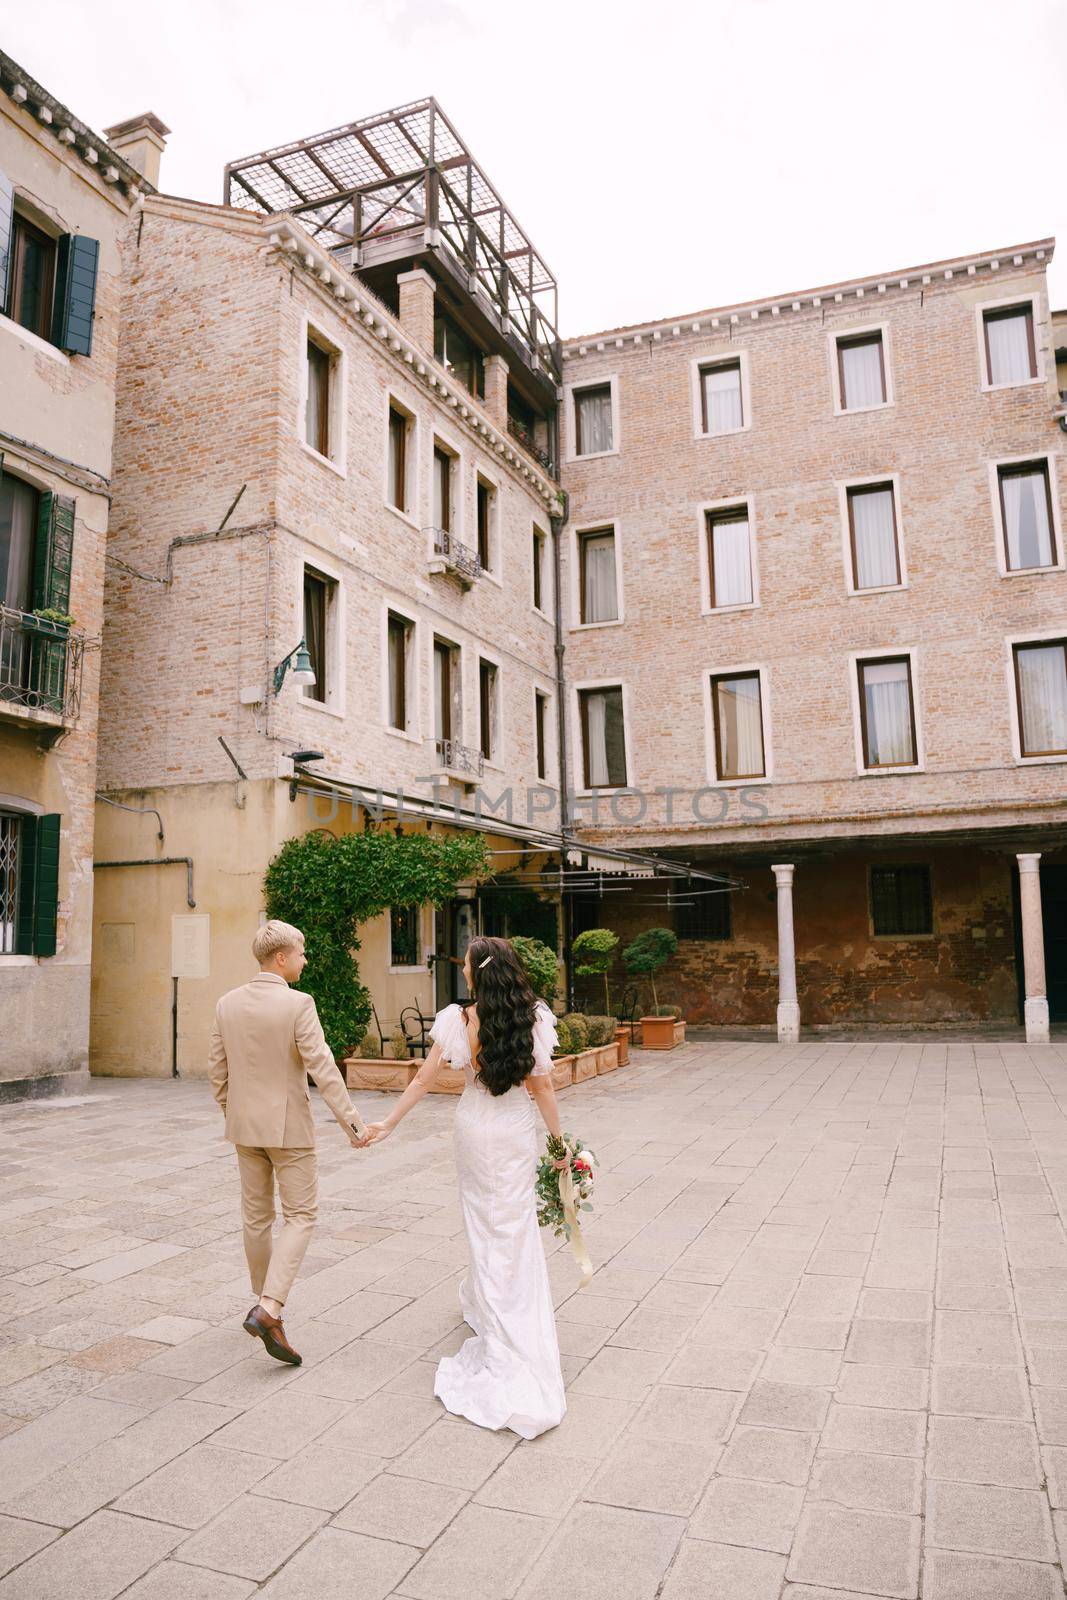 The bride and groom walk through the deserted streets of the city. The newlyweds hold hands and walk against the facade of the building.